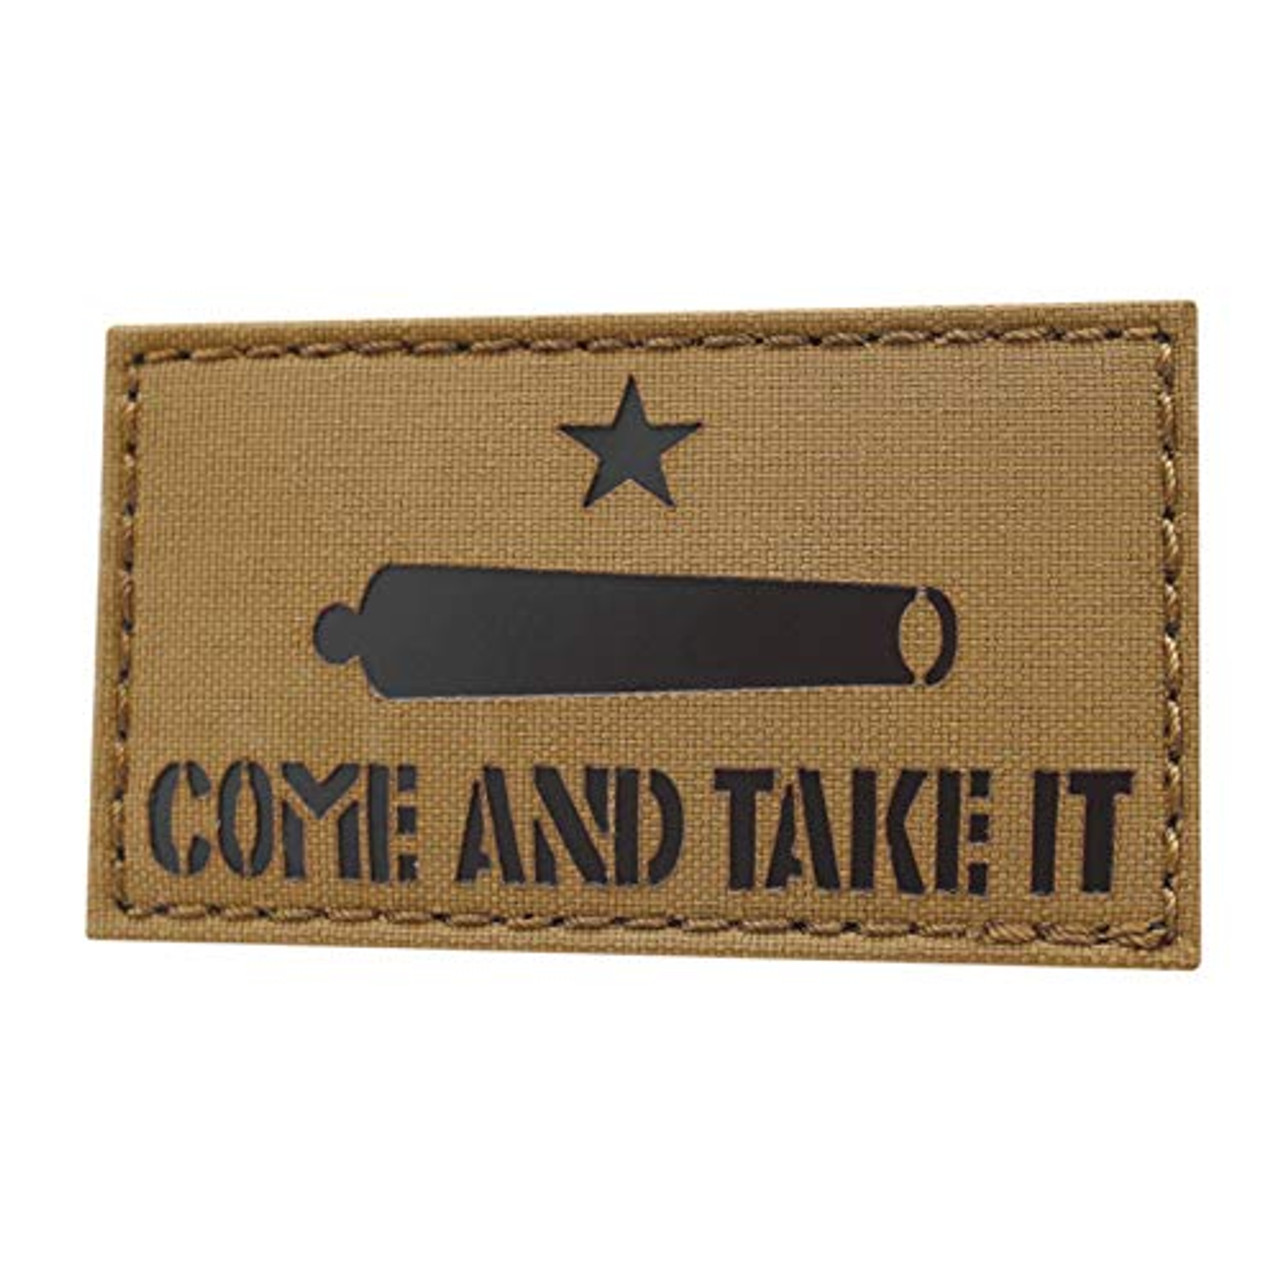 TEXAS REVOLUTION IRON-ON EMBROIDERED GONZALES GUN COME AND TAKE IT FLAG PATCH 